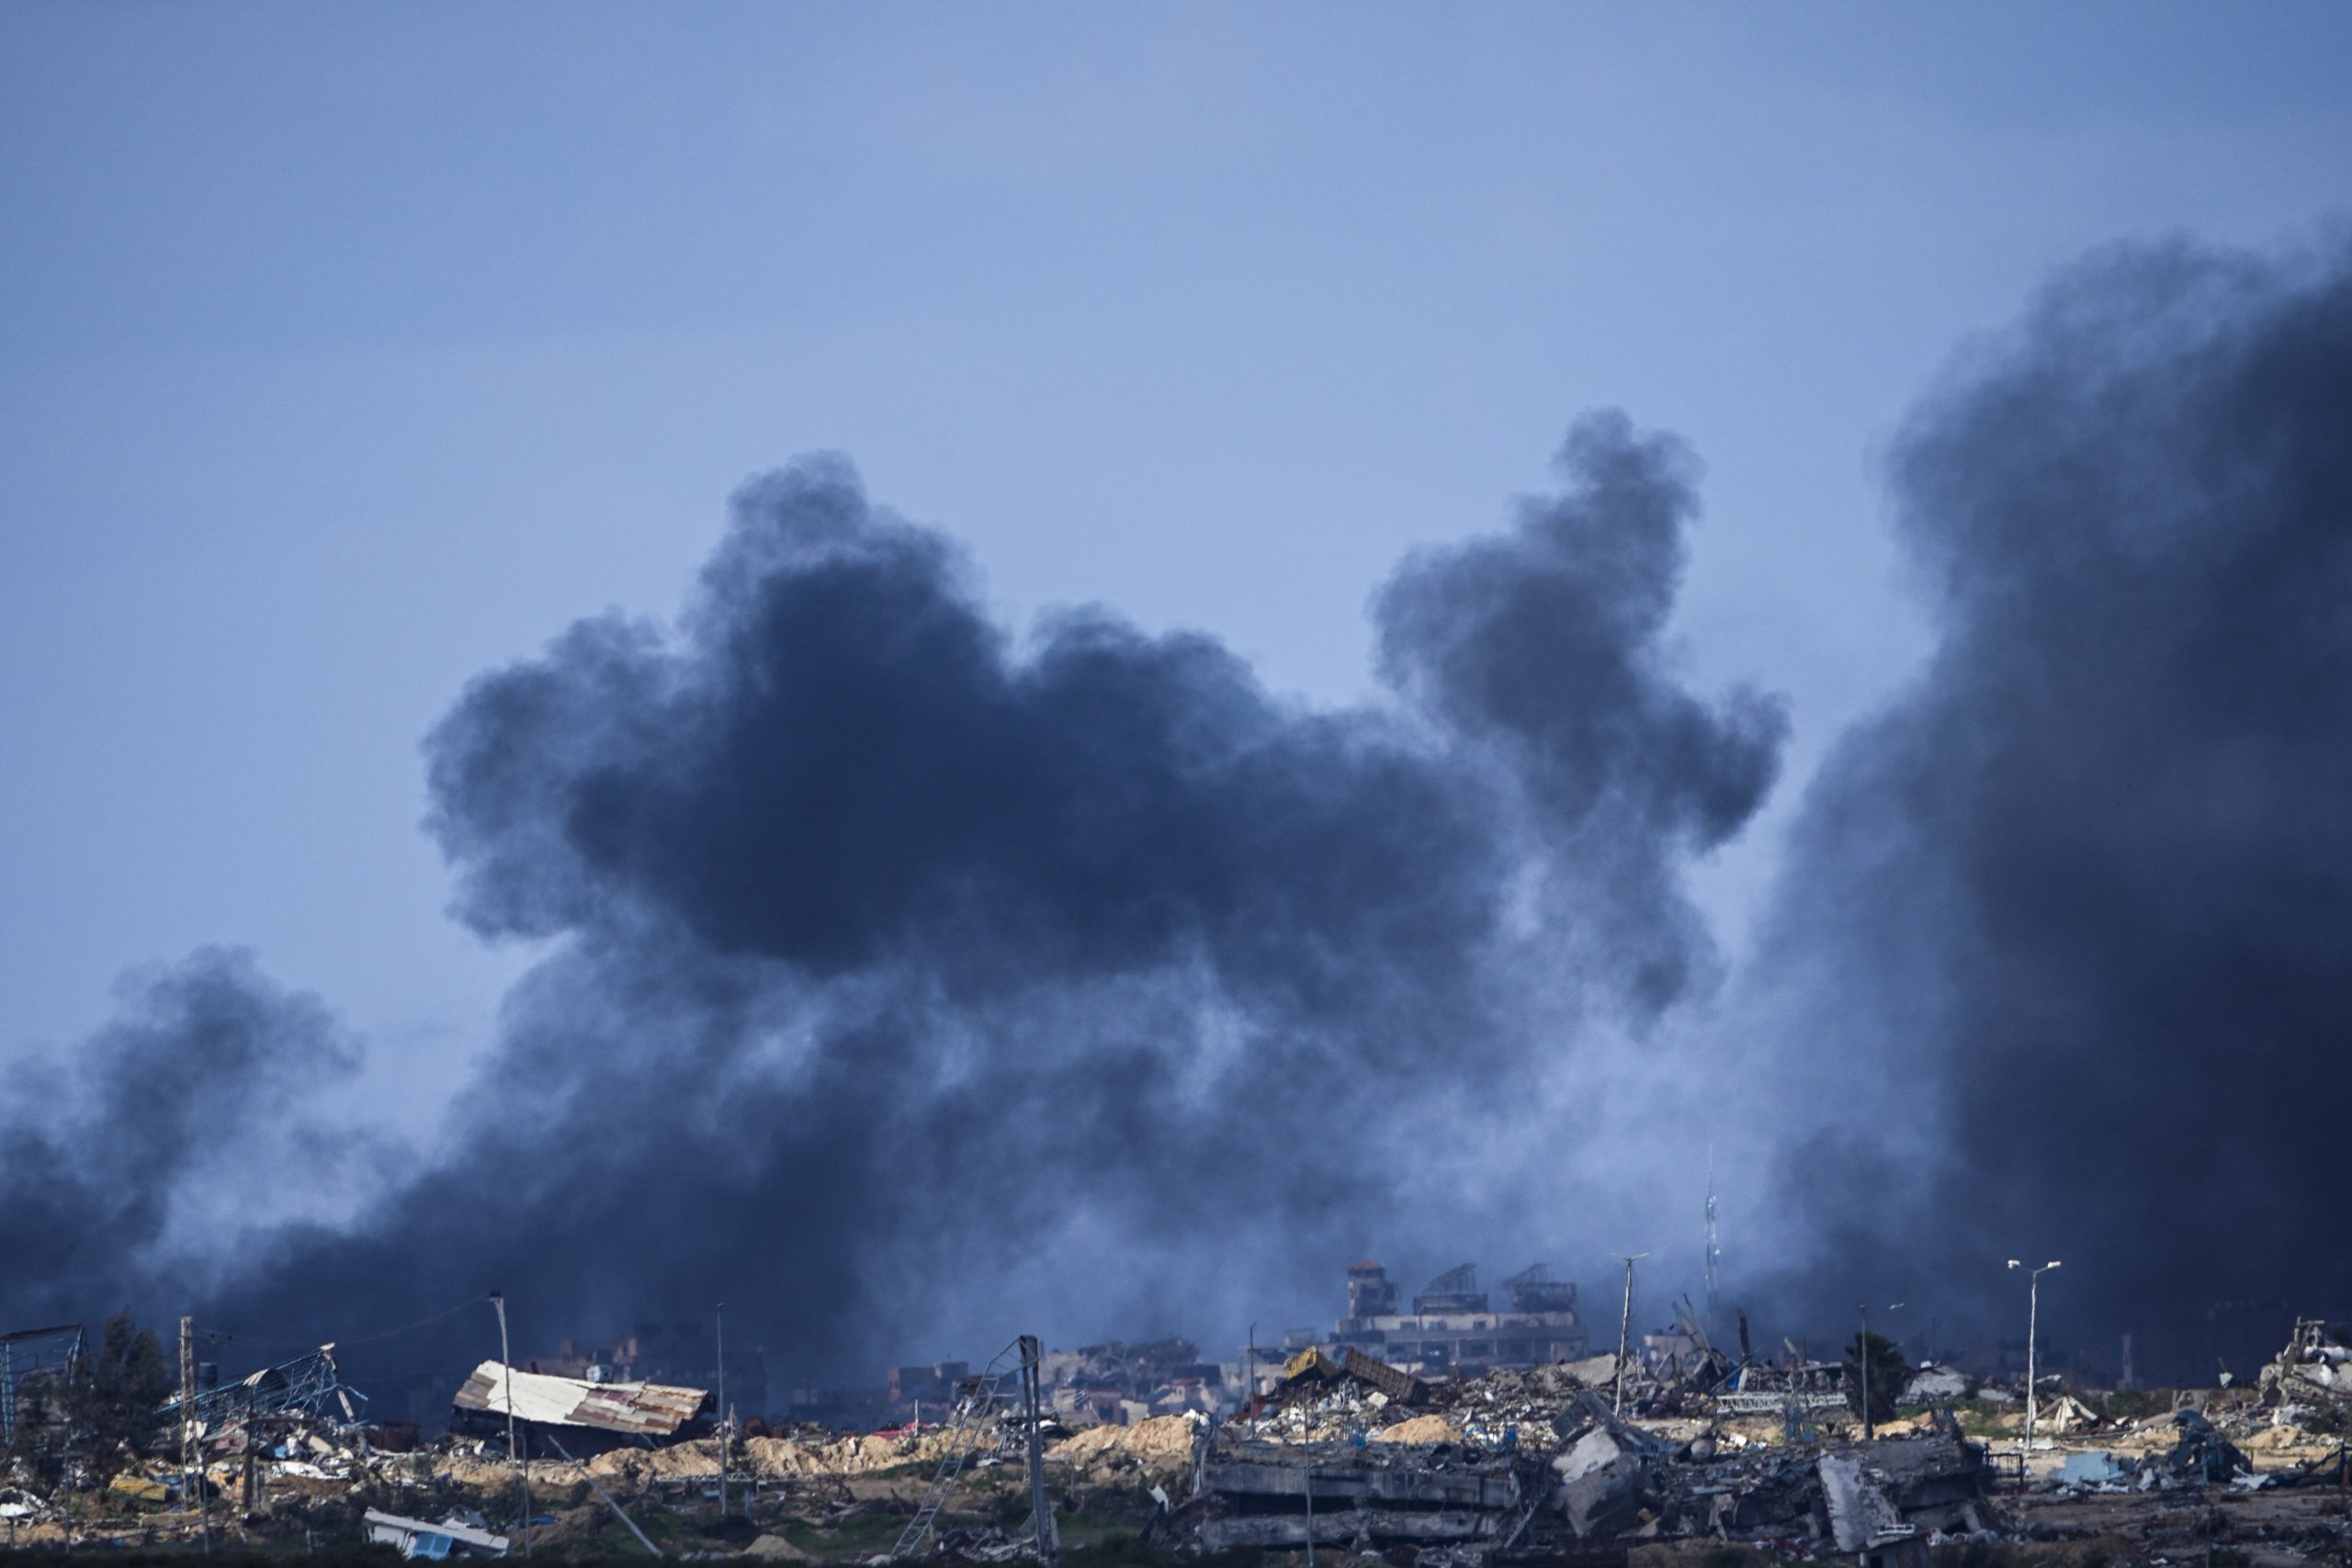 Israeli Airstrike Spurs Debate on U.S. Aid Conditions and Policy Shifts